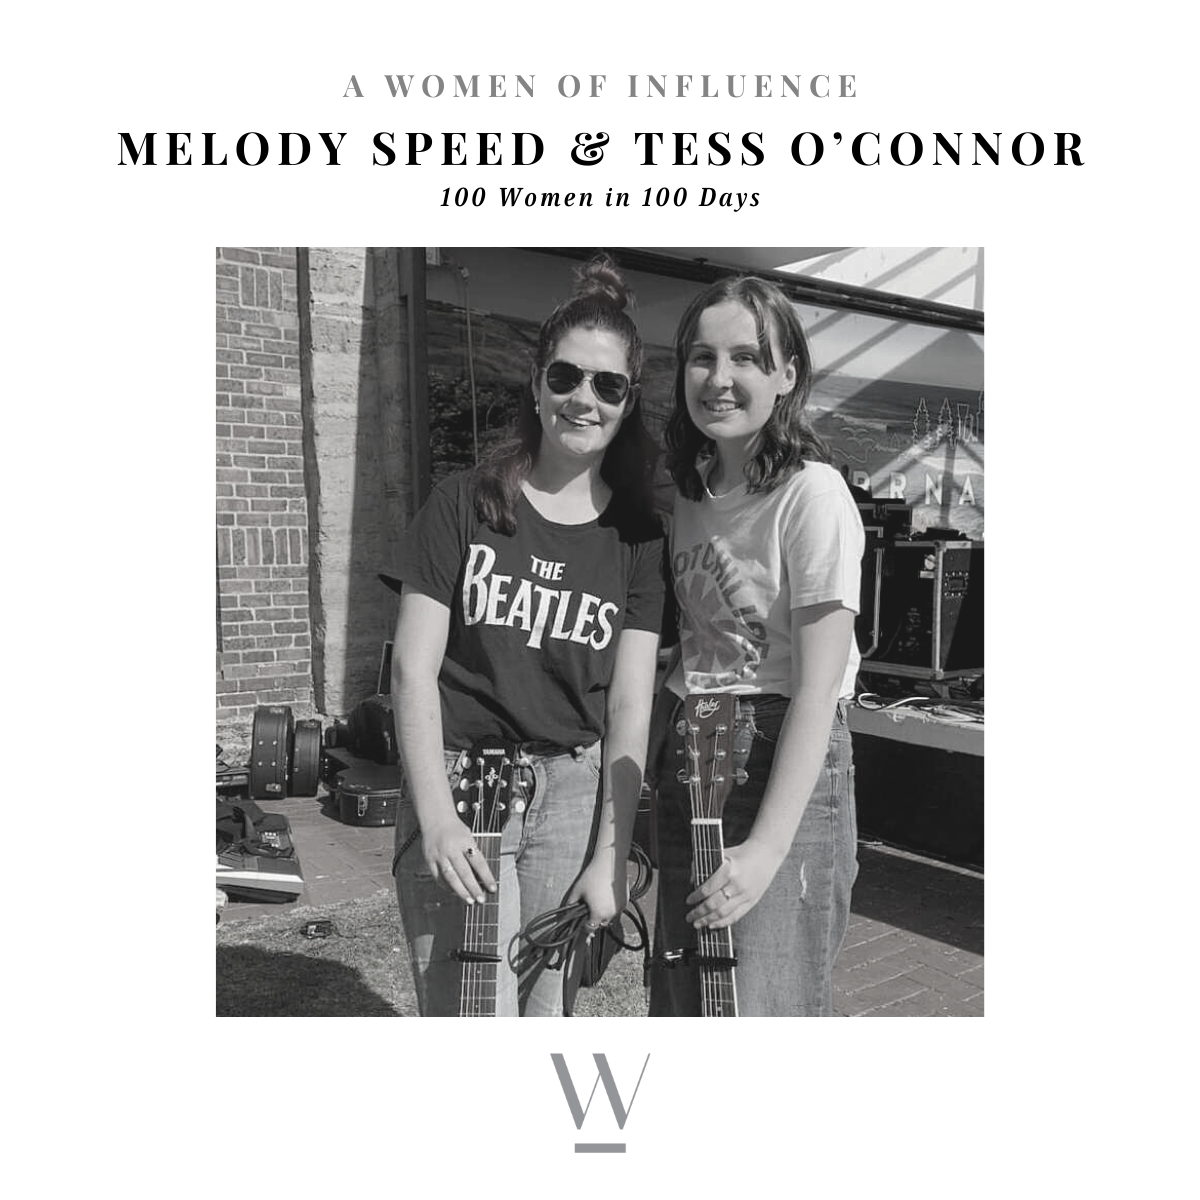 44/100  Melody Speed & Tess O'Connor: Music is life